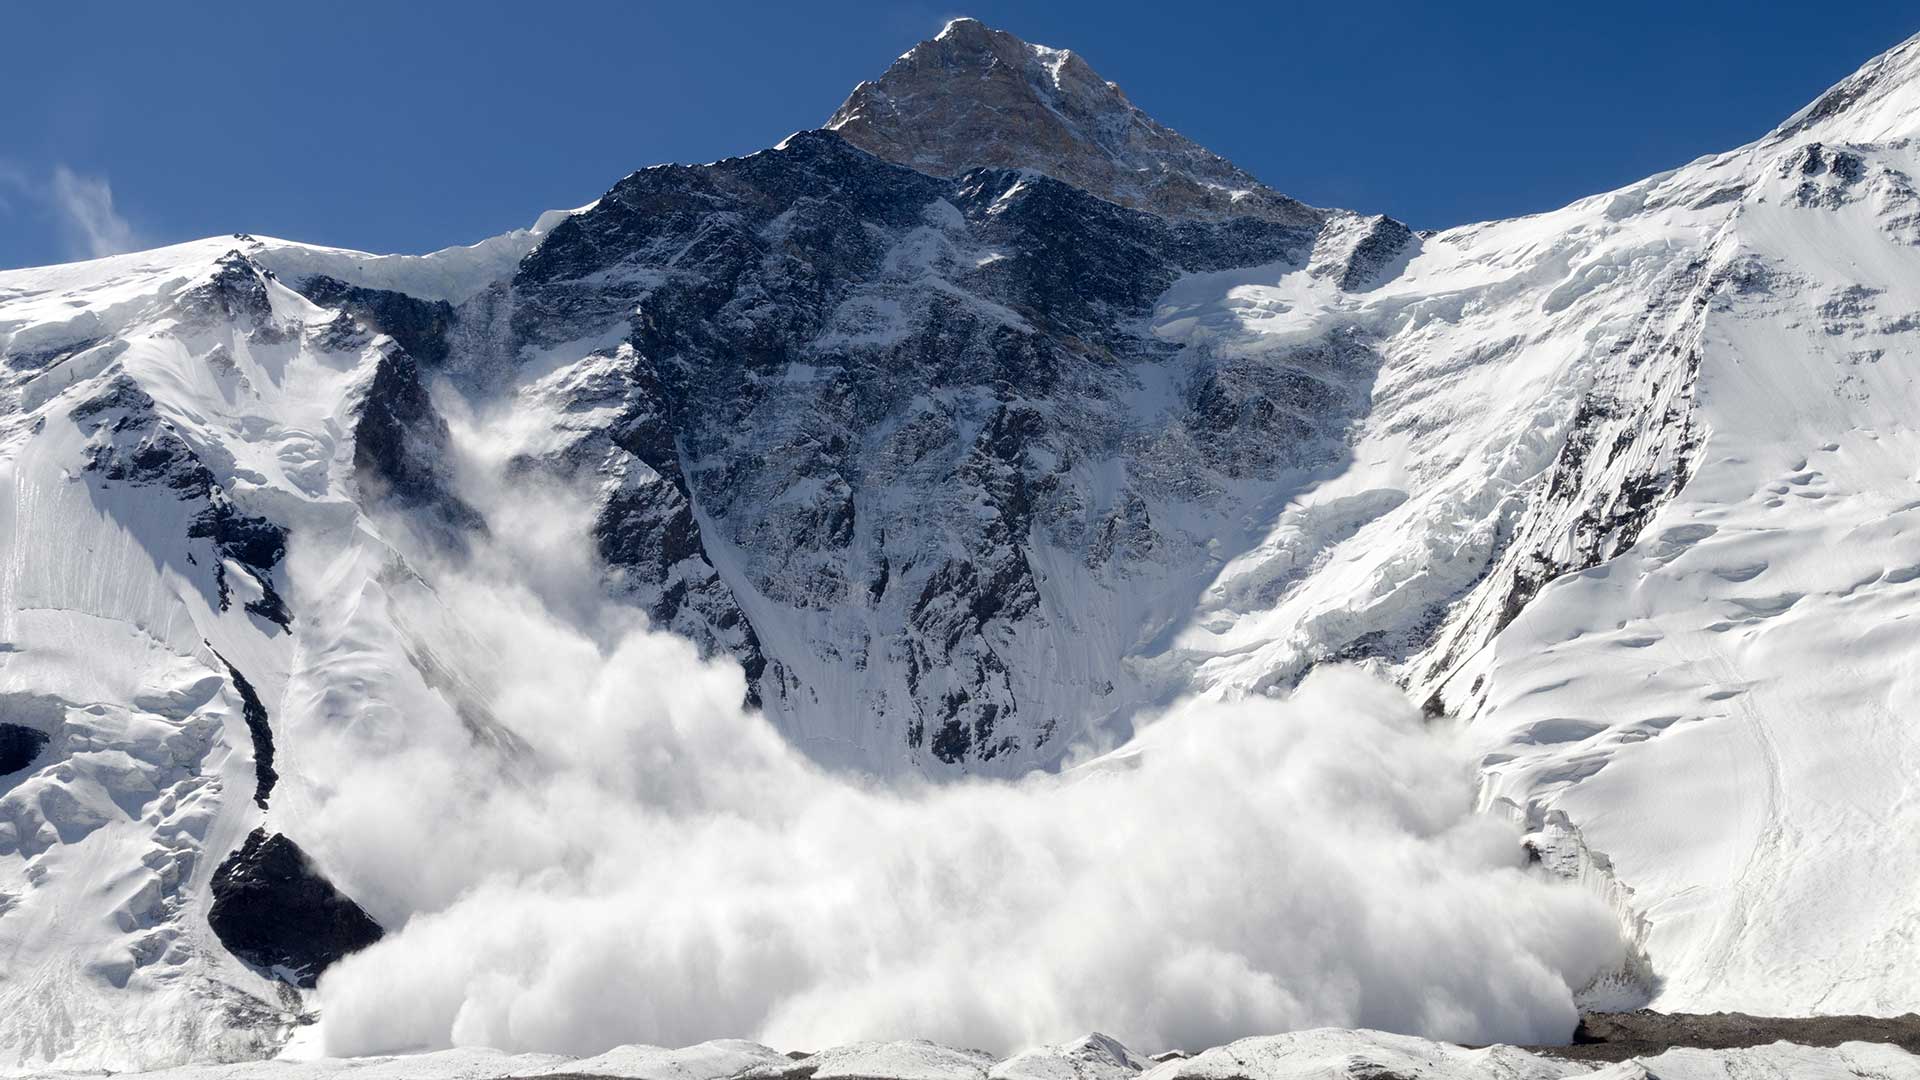 Avalanche falling from a mountain